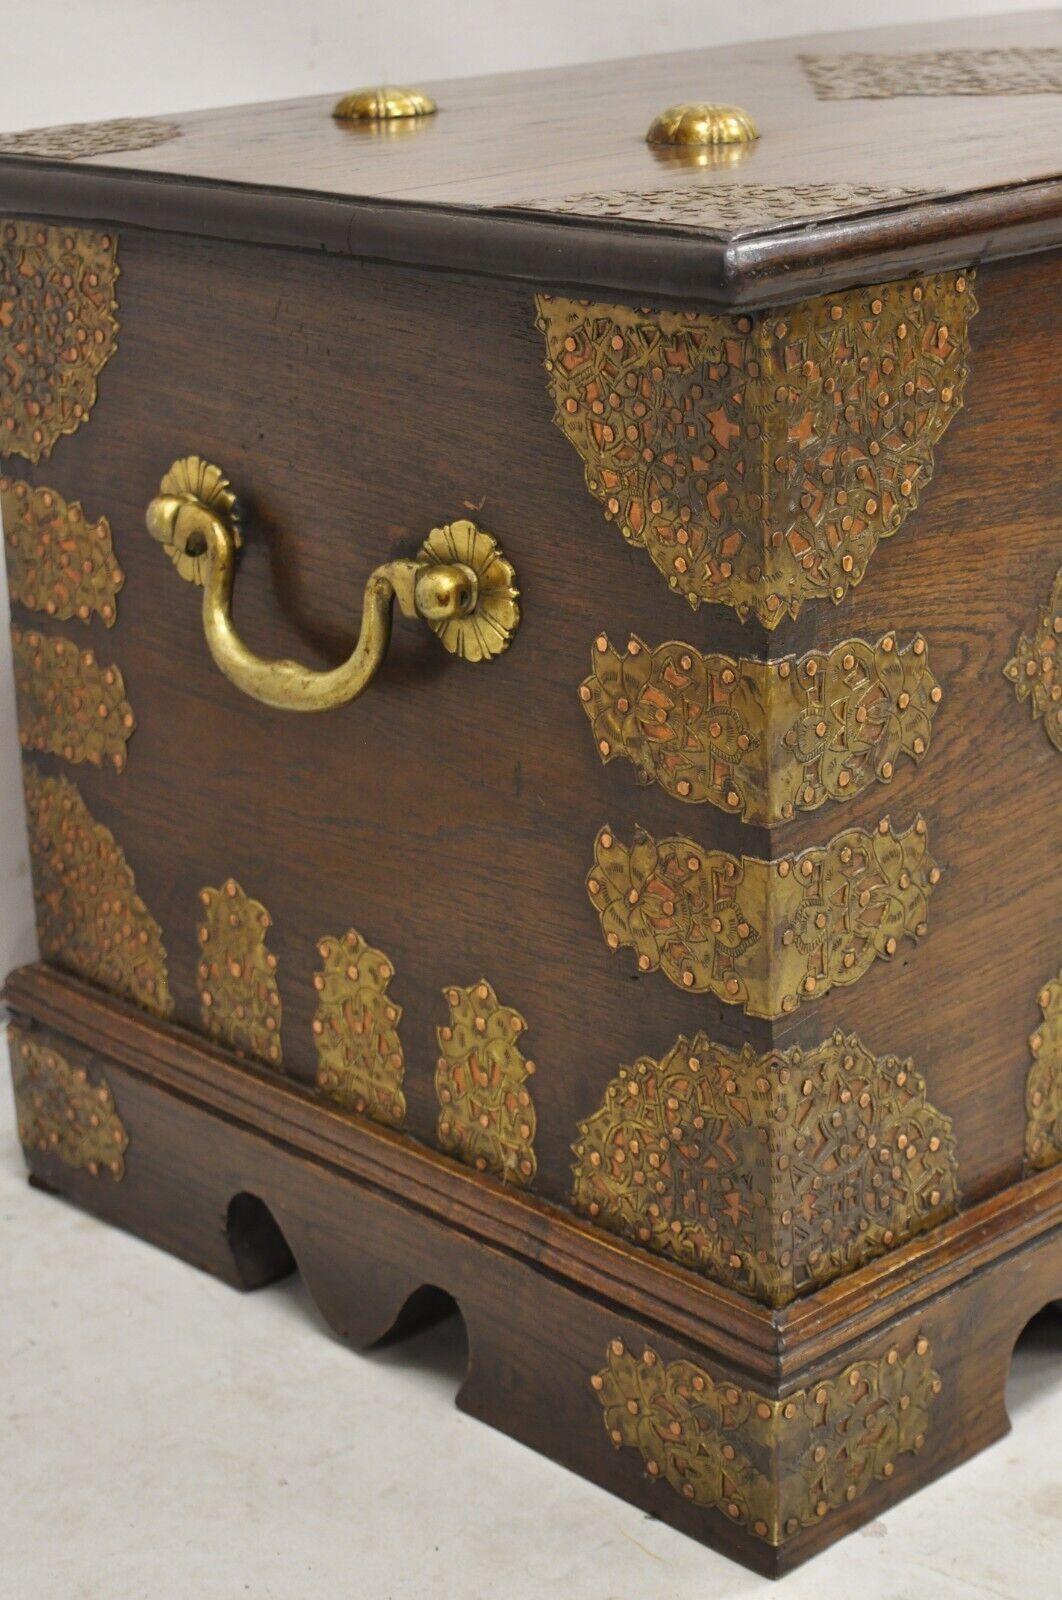 Early 20th Century Antique Oak Wood & Brass Mounted Syrian Coffer Blanket Chest Trunk For Sale